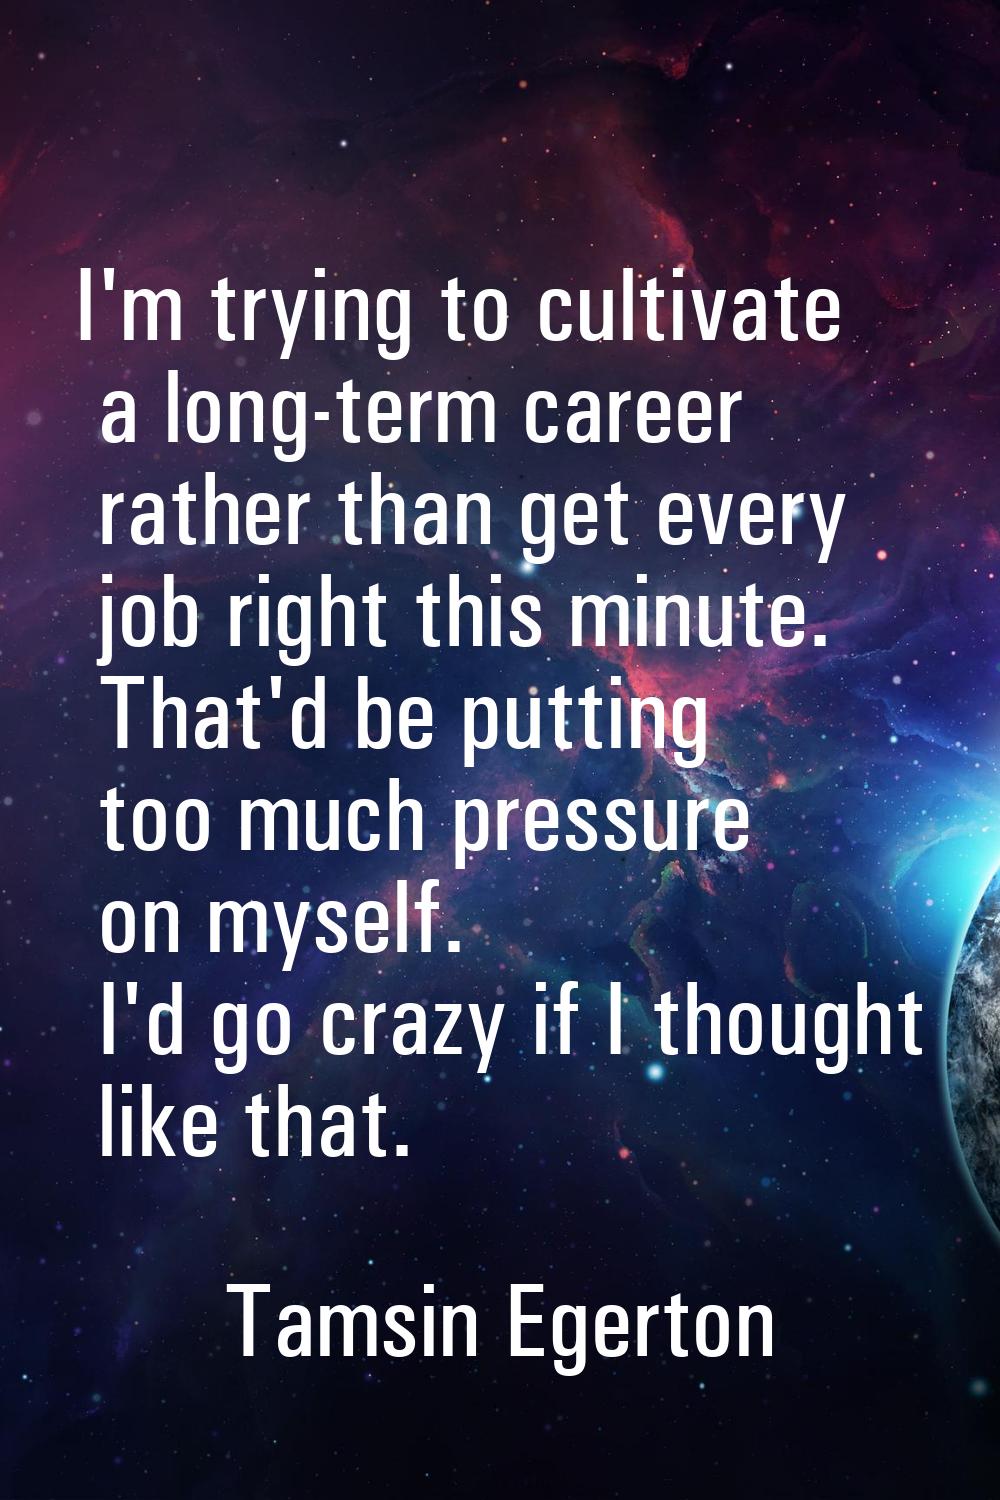 I'm trying to cultivate a long-term career rather than get every job right this minute. That'd be p